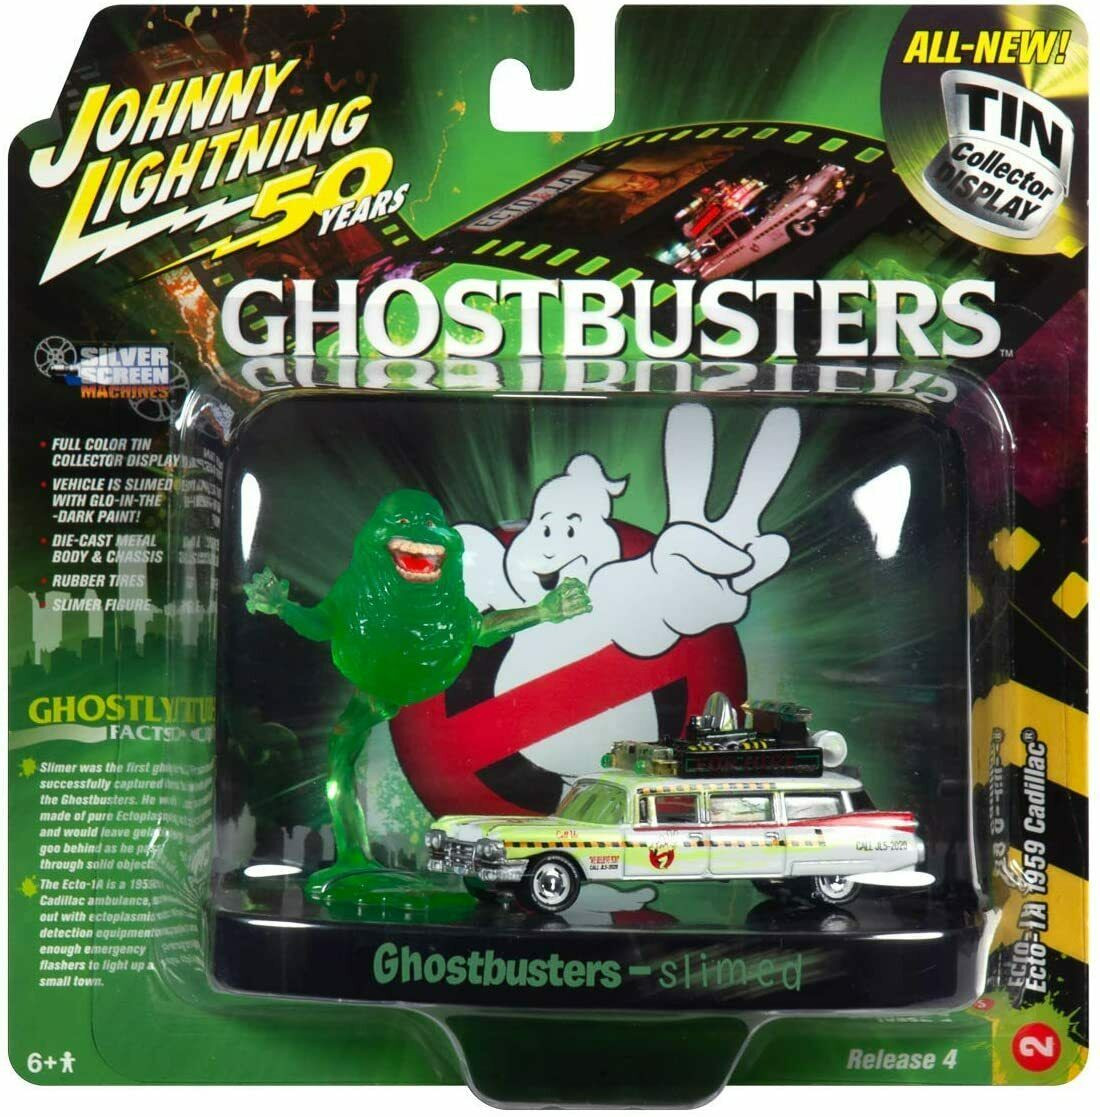 Johnny Lightning 1:64 1959 CADILLAC Ghostbusters Ecto-1A 